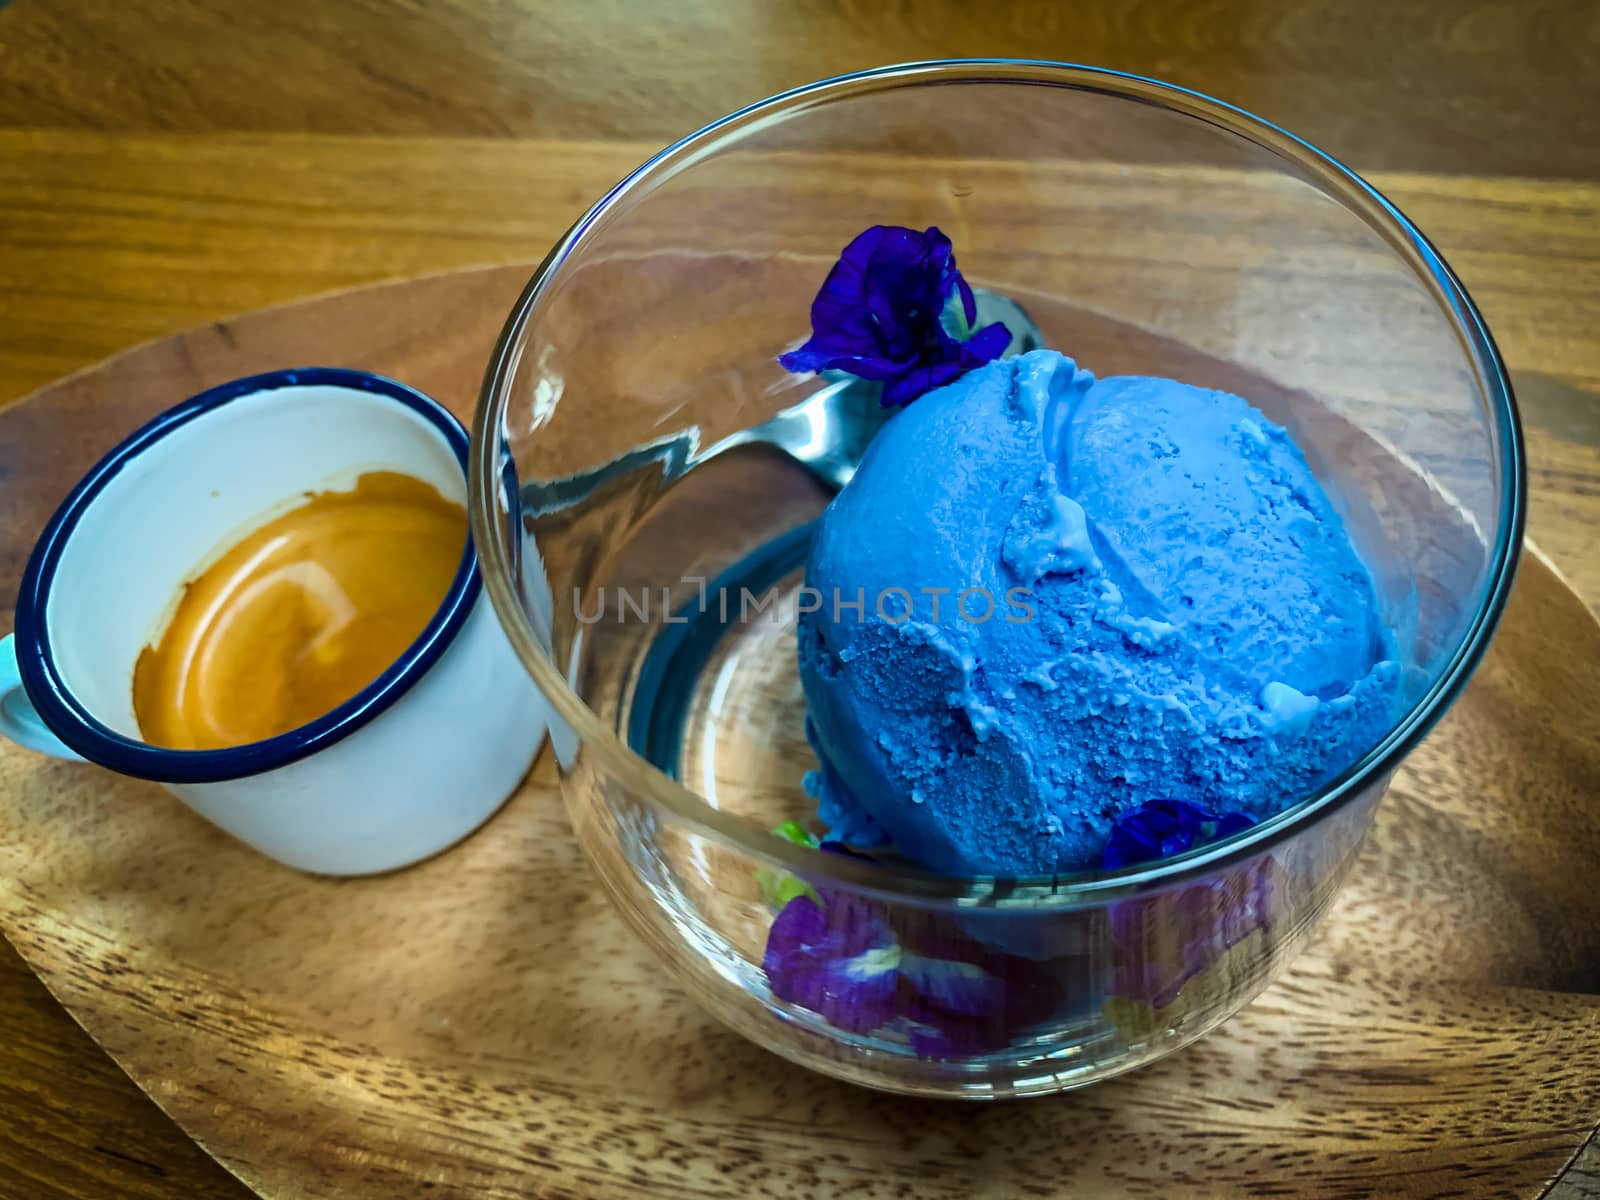 Blue ice cream in a clear glass with ready-to-eat coffee